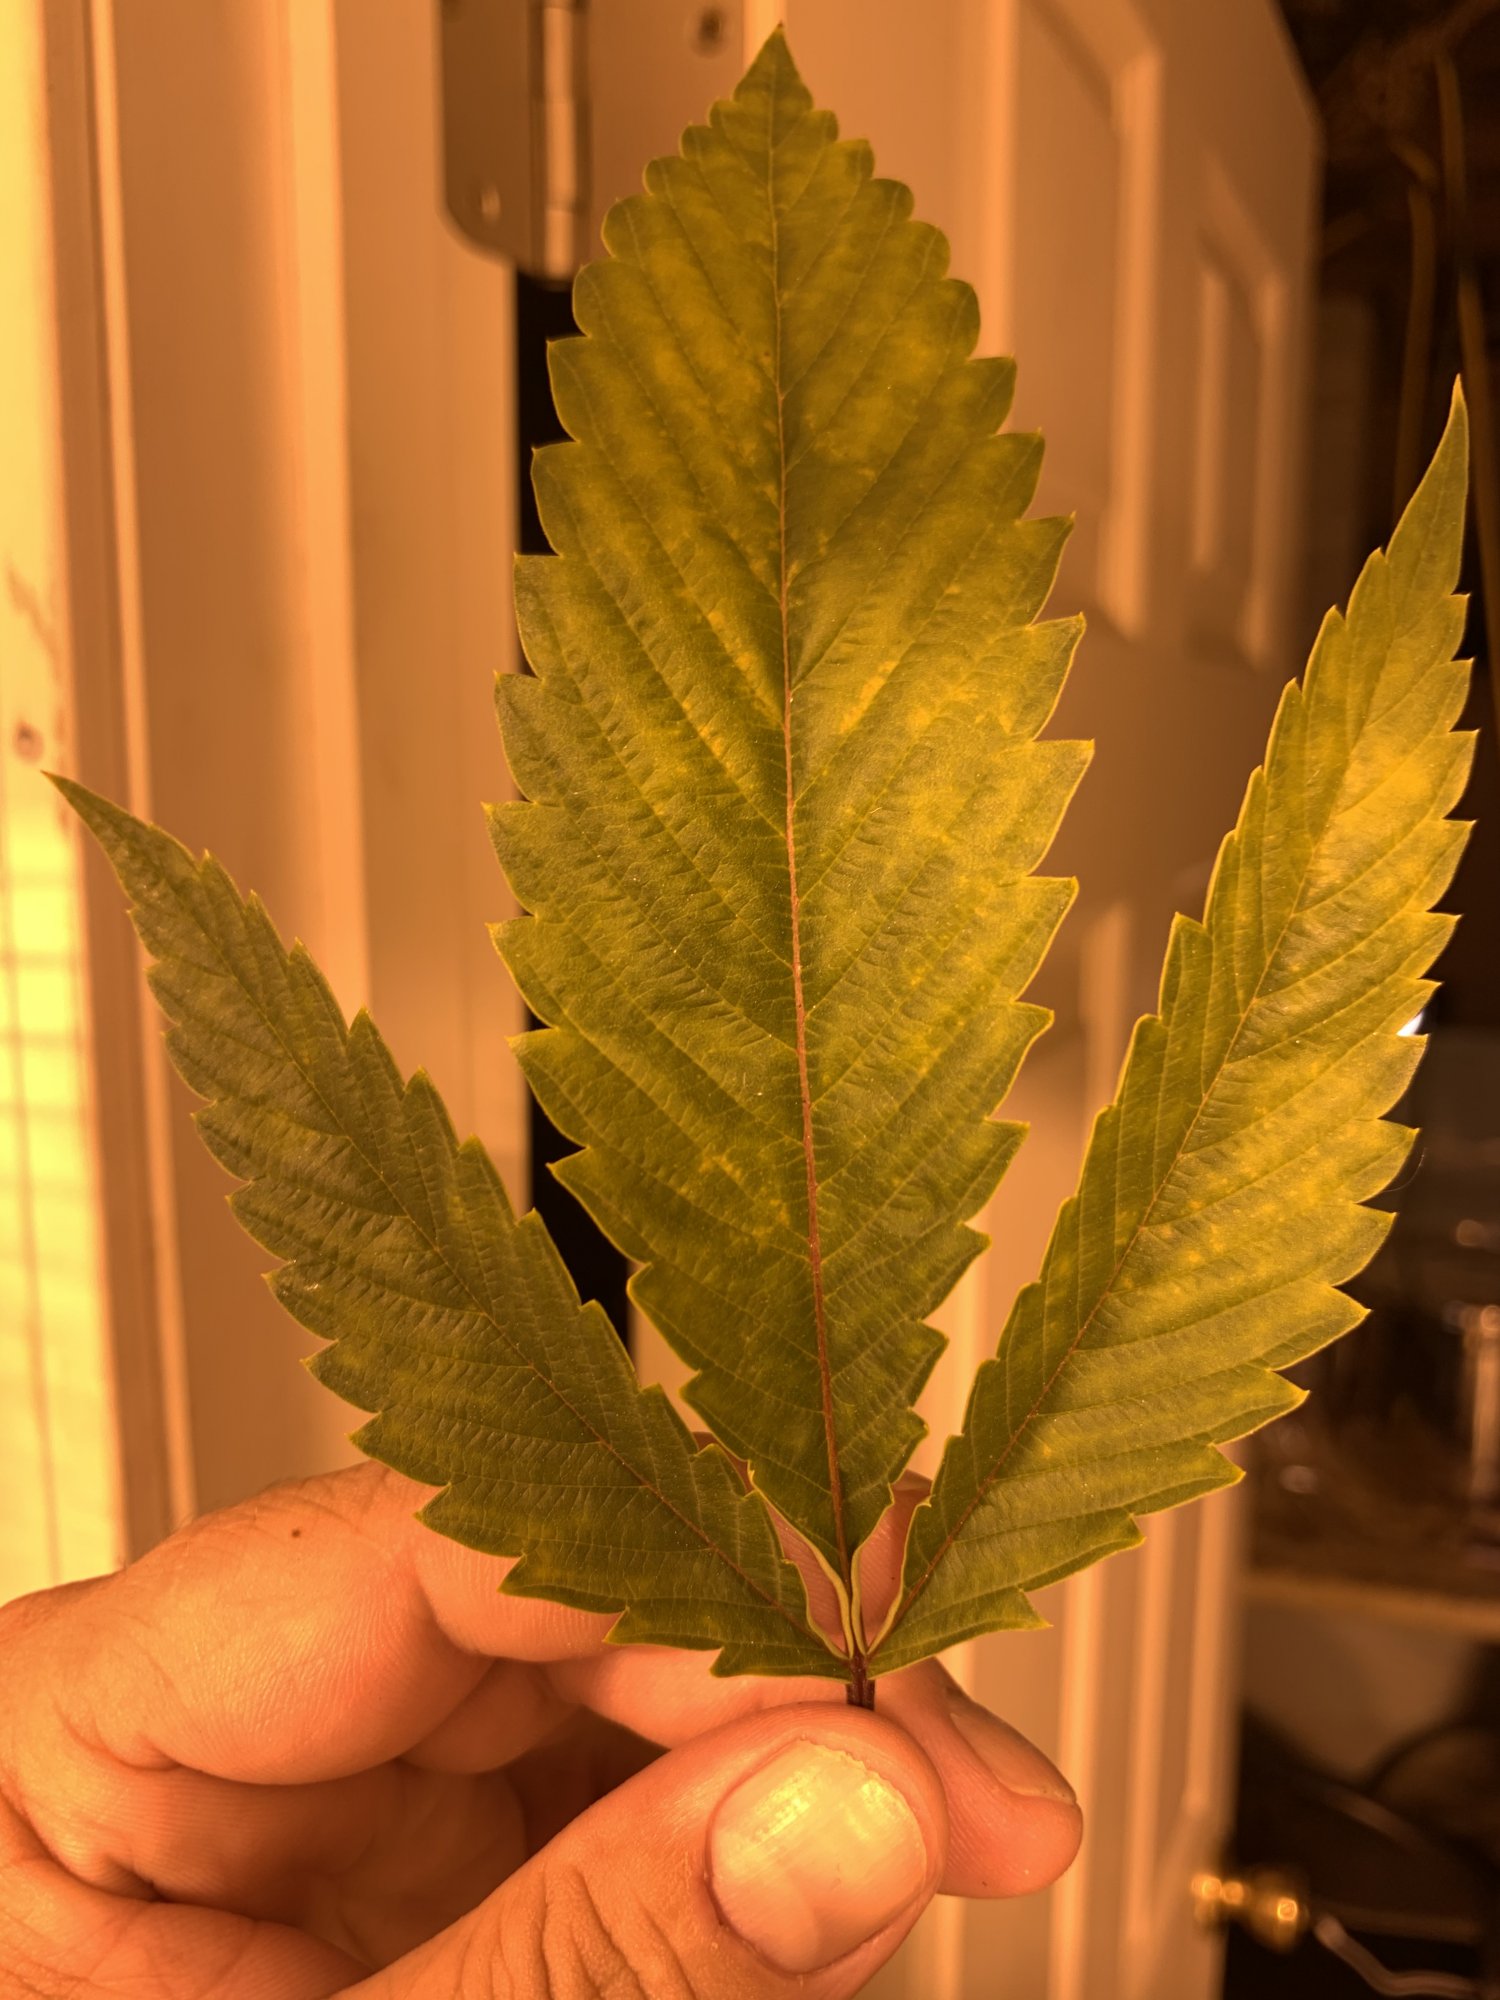 Deficiency could use advice 2